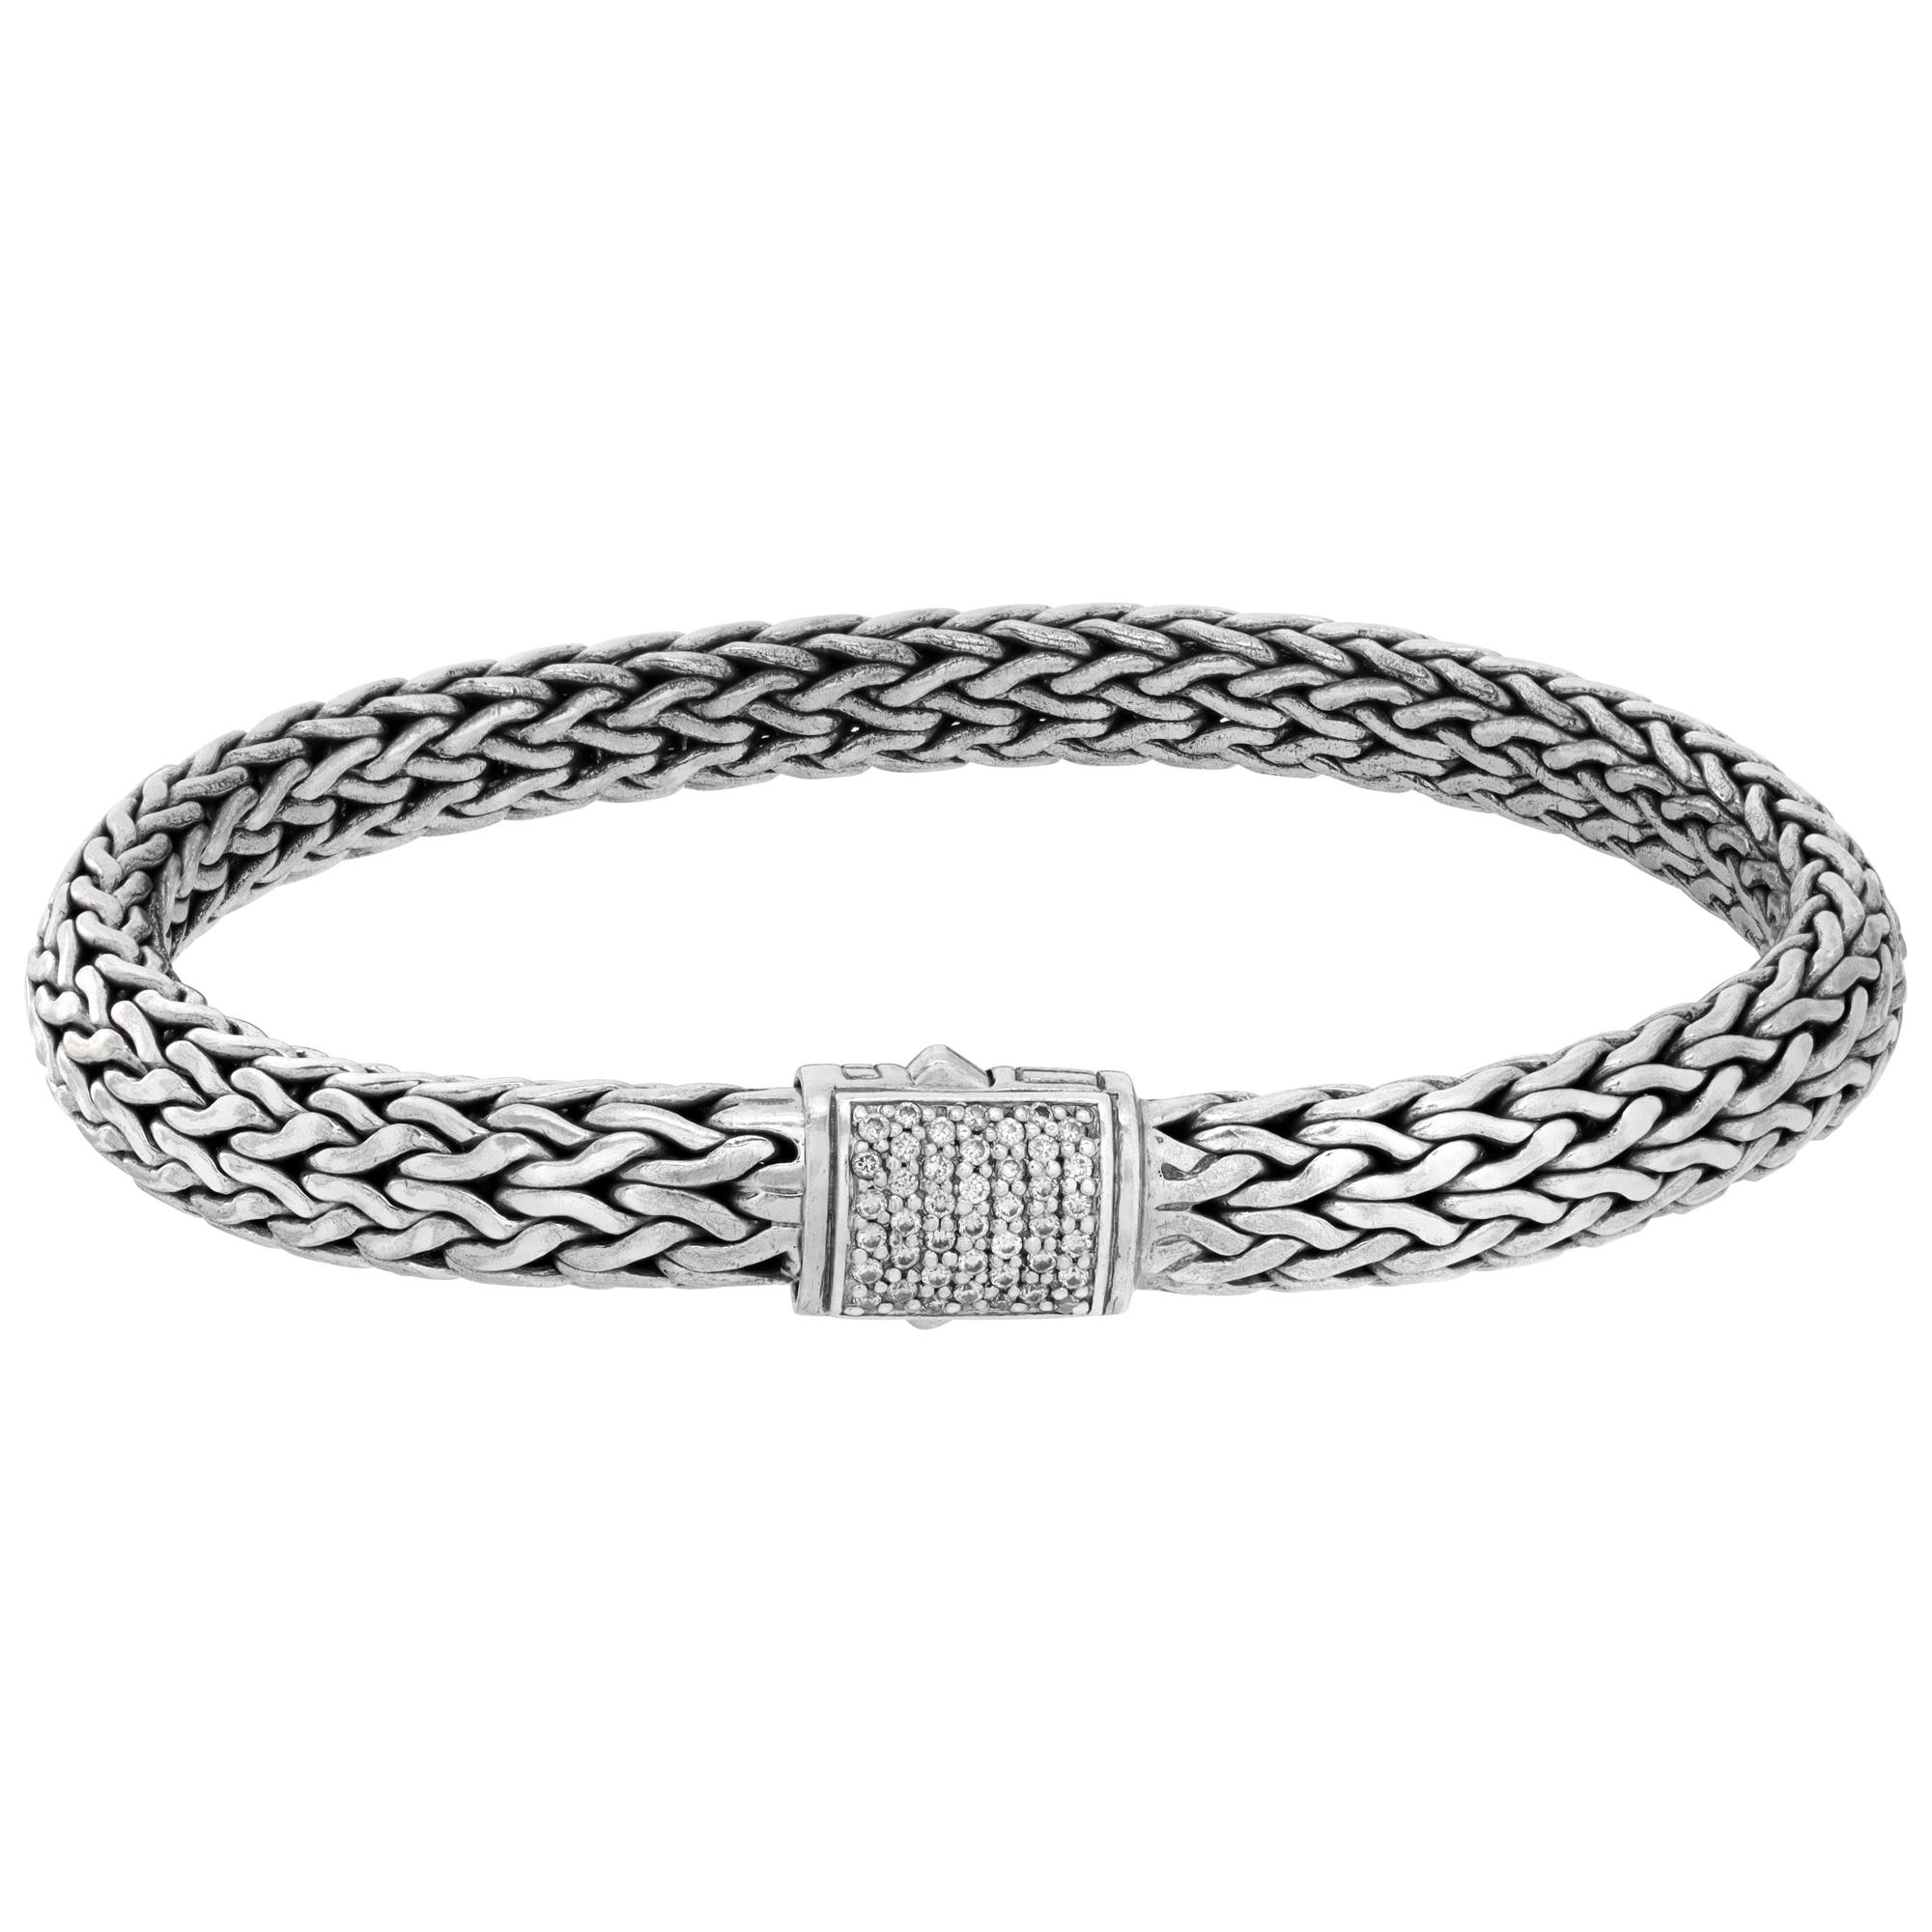 John Hardy Icon bracelet in sterling silver with 0.24 carat in pave diamonds